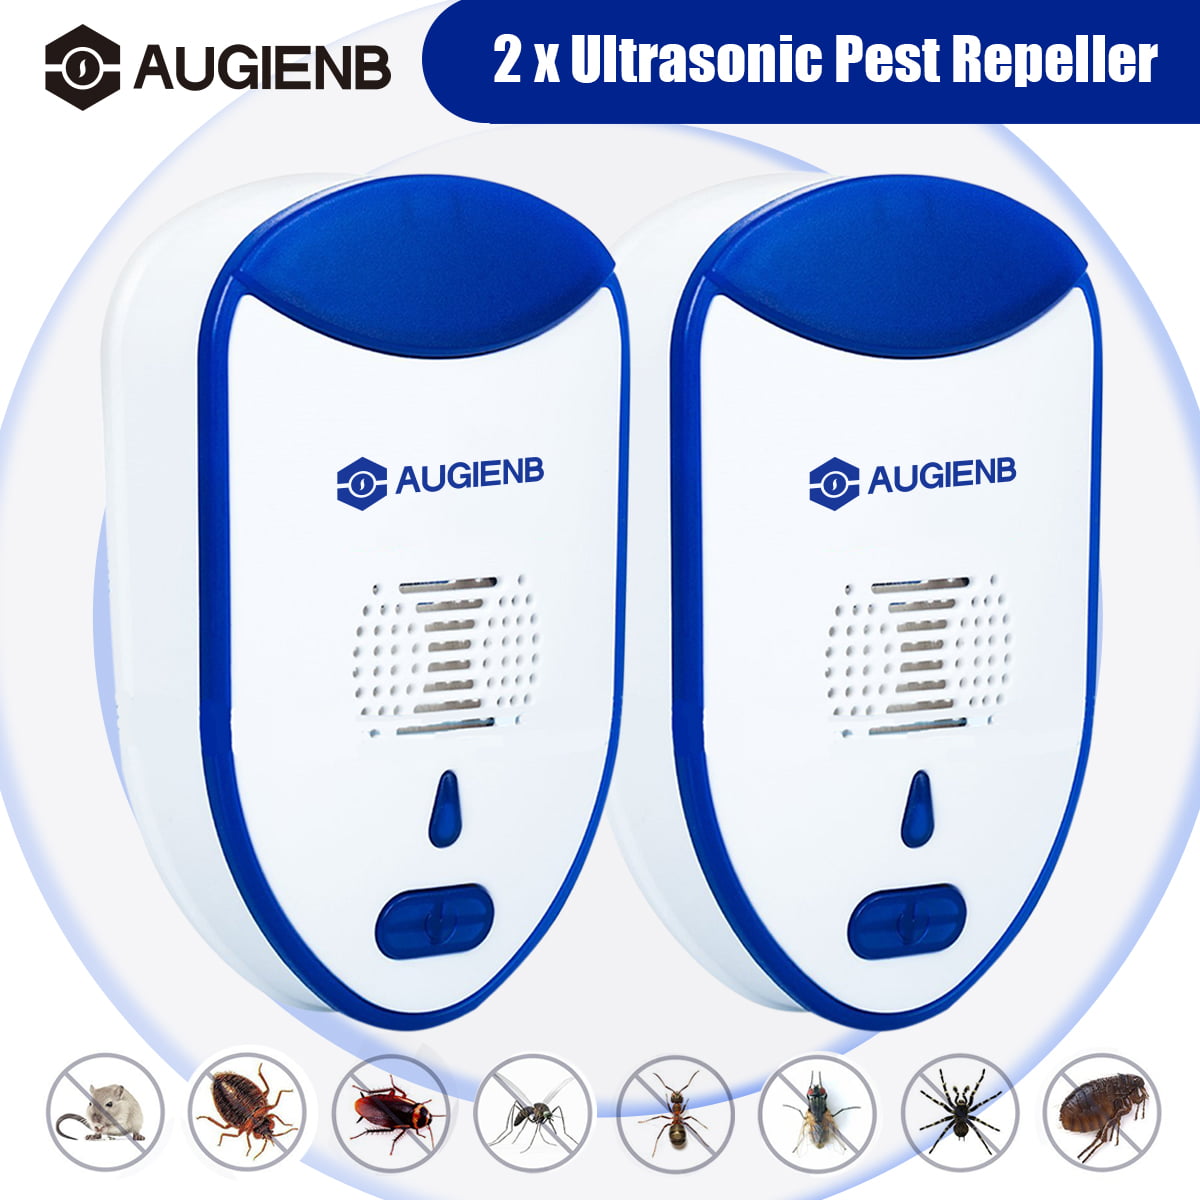 2x Ultrasonic Pest Control Repeller Reject Mosquito Insect Electronic US Plug In 